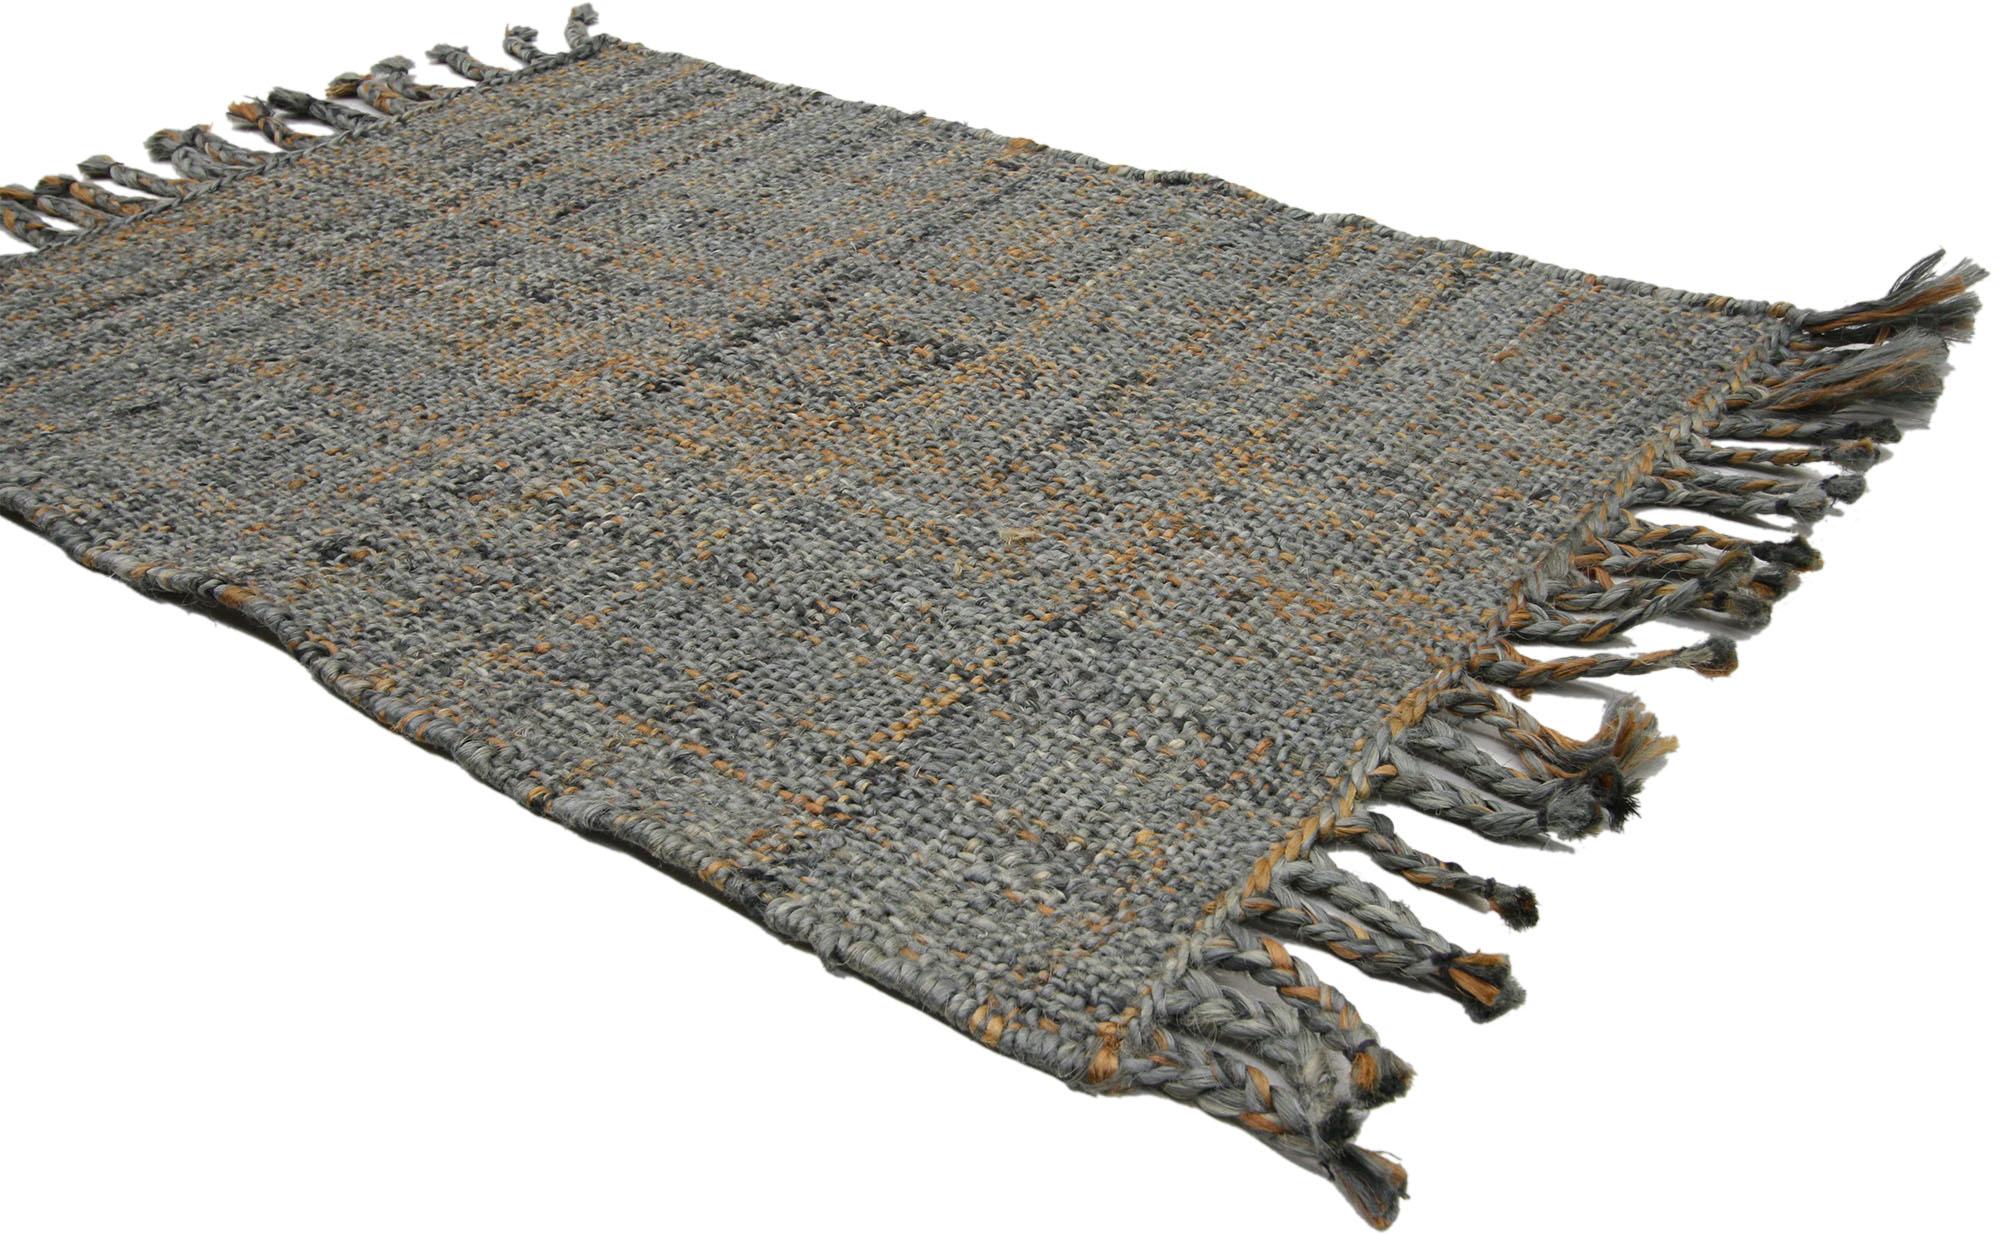 30380 Modern Indian Dhurrie Rug, 2'03 x 03'01.  Radiating a modern style with artisan charm, this handwoven modern Dhurrie rug blends seamlessly from rust to slate gray in softly gradated striations running selvage to selvage. Its earthy tones and